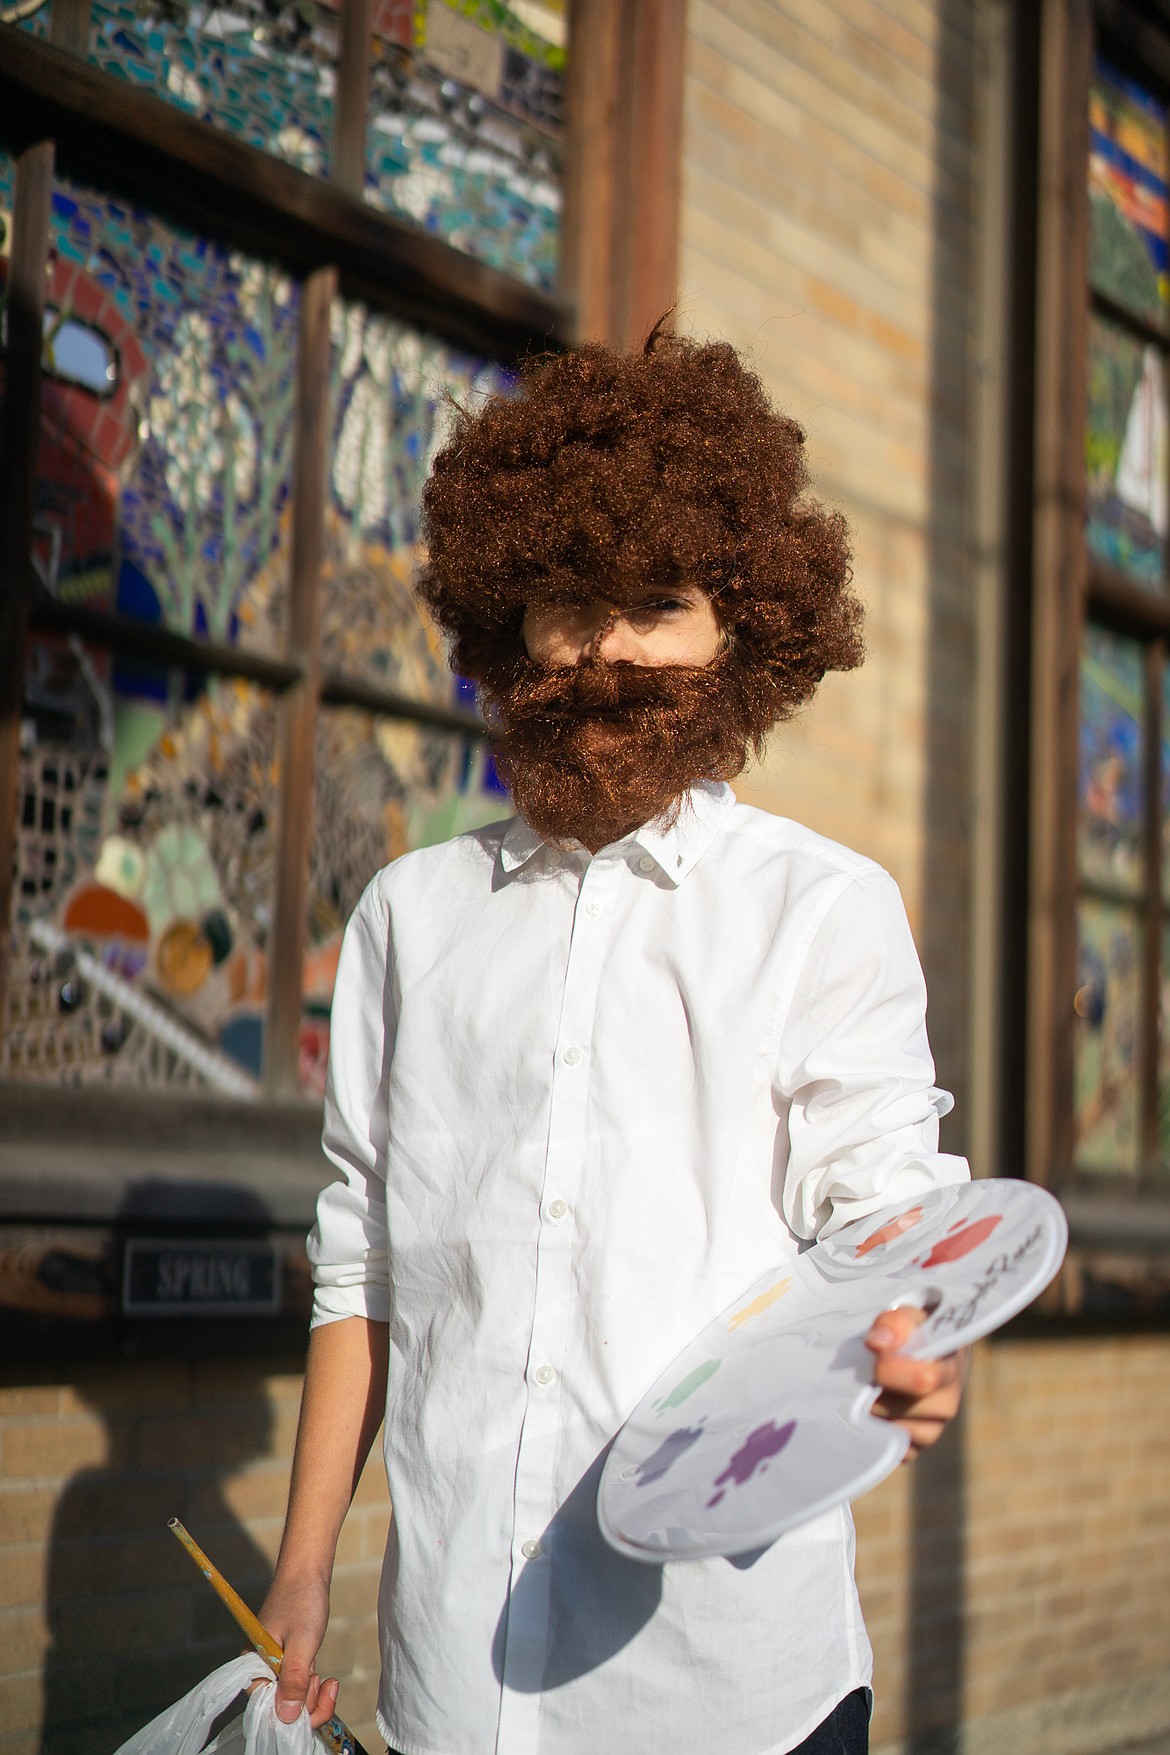 Bob Ross makes Central Avenue his canvas during the Whitefish Trick or Treat downtown on Thursday. (Daniel McKay/Whitefish Pilot)